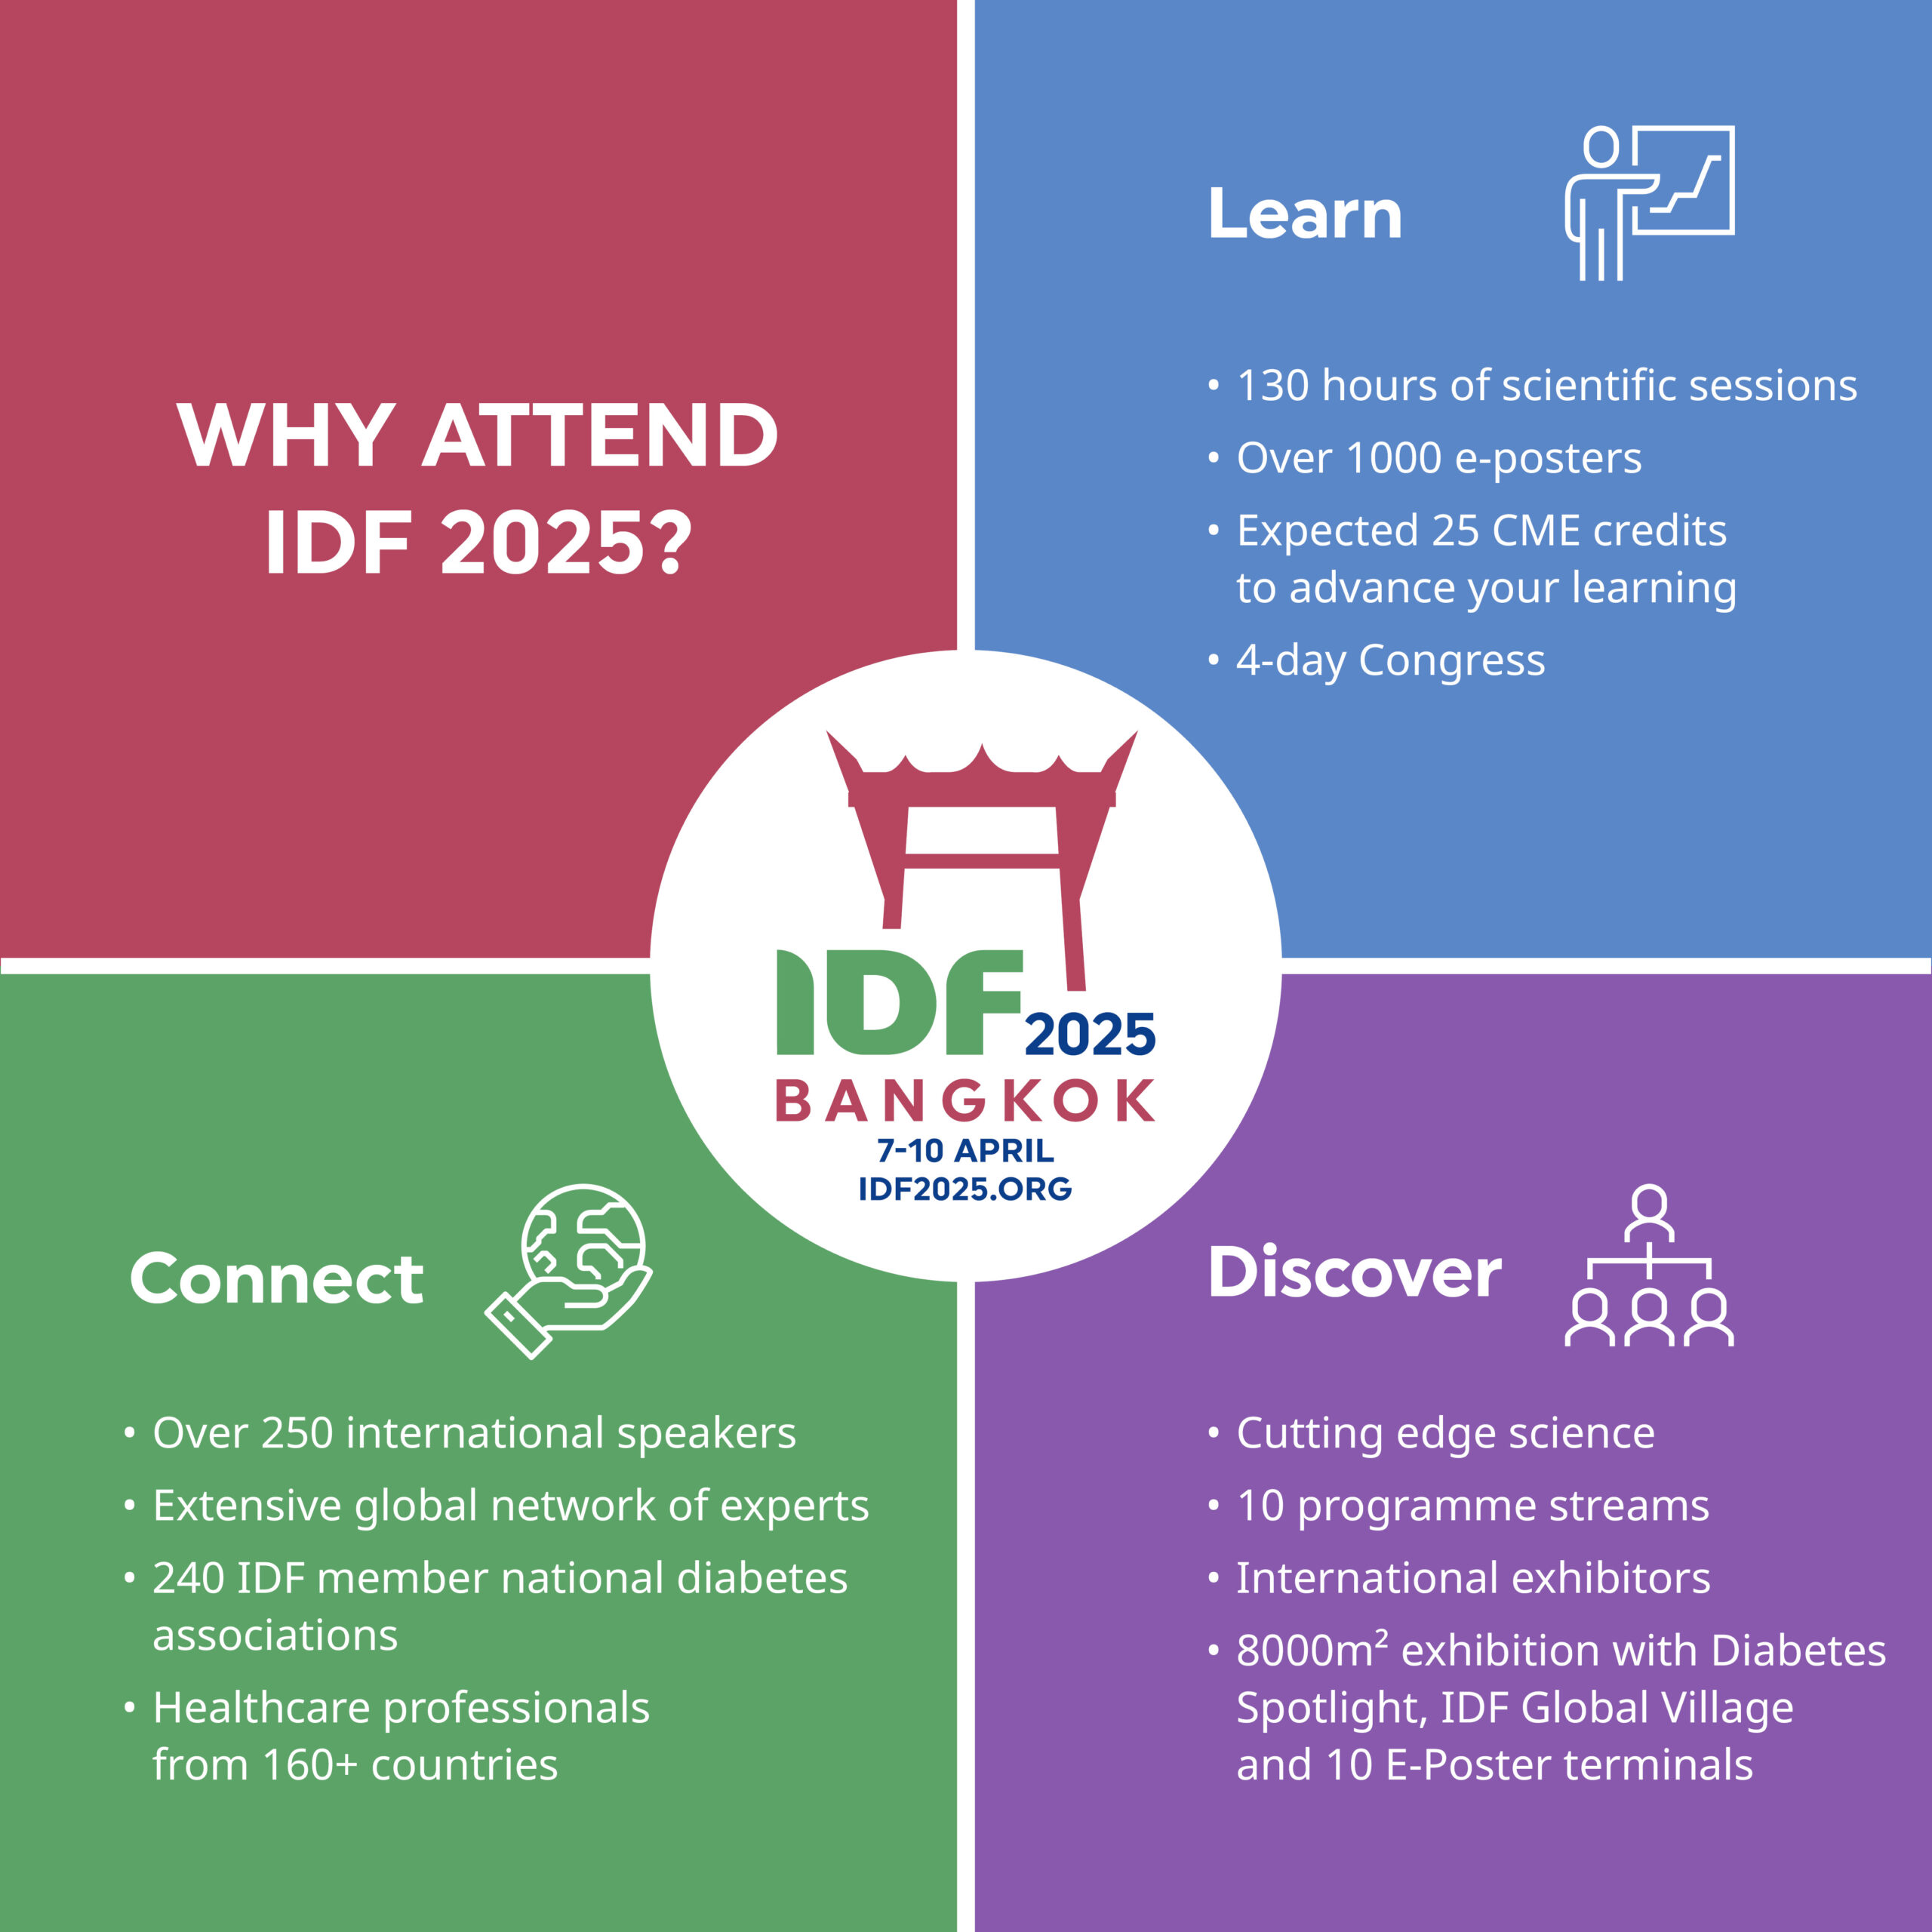 Why attend IDF 2025